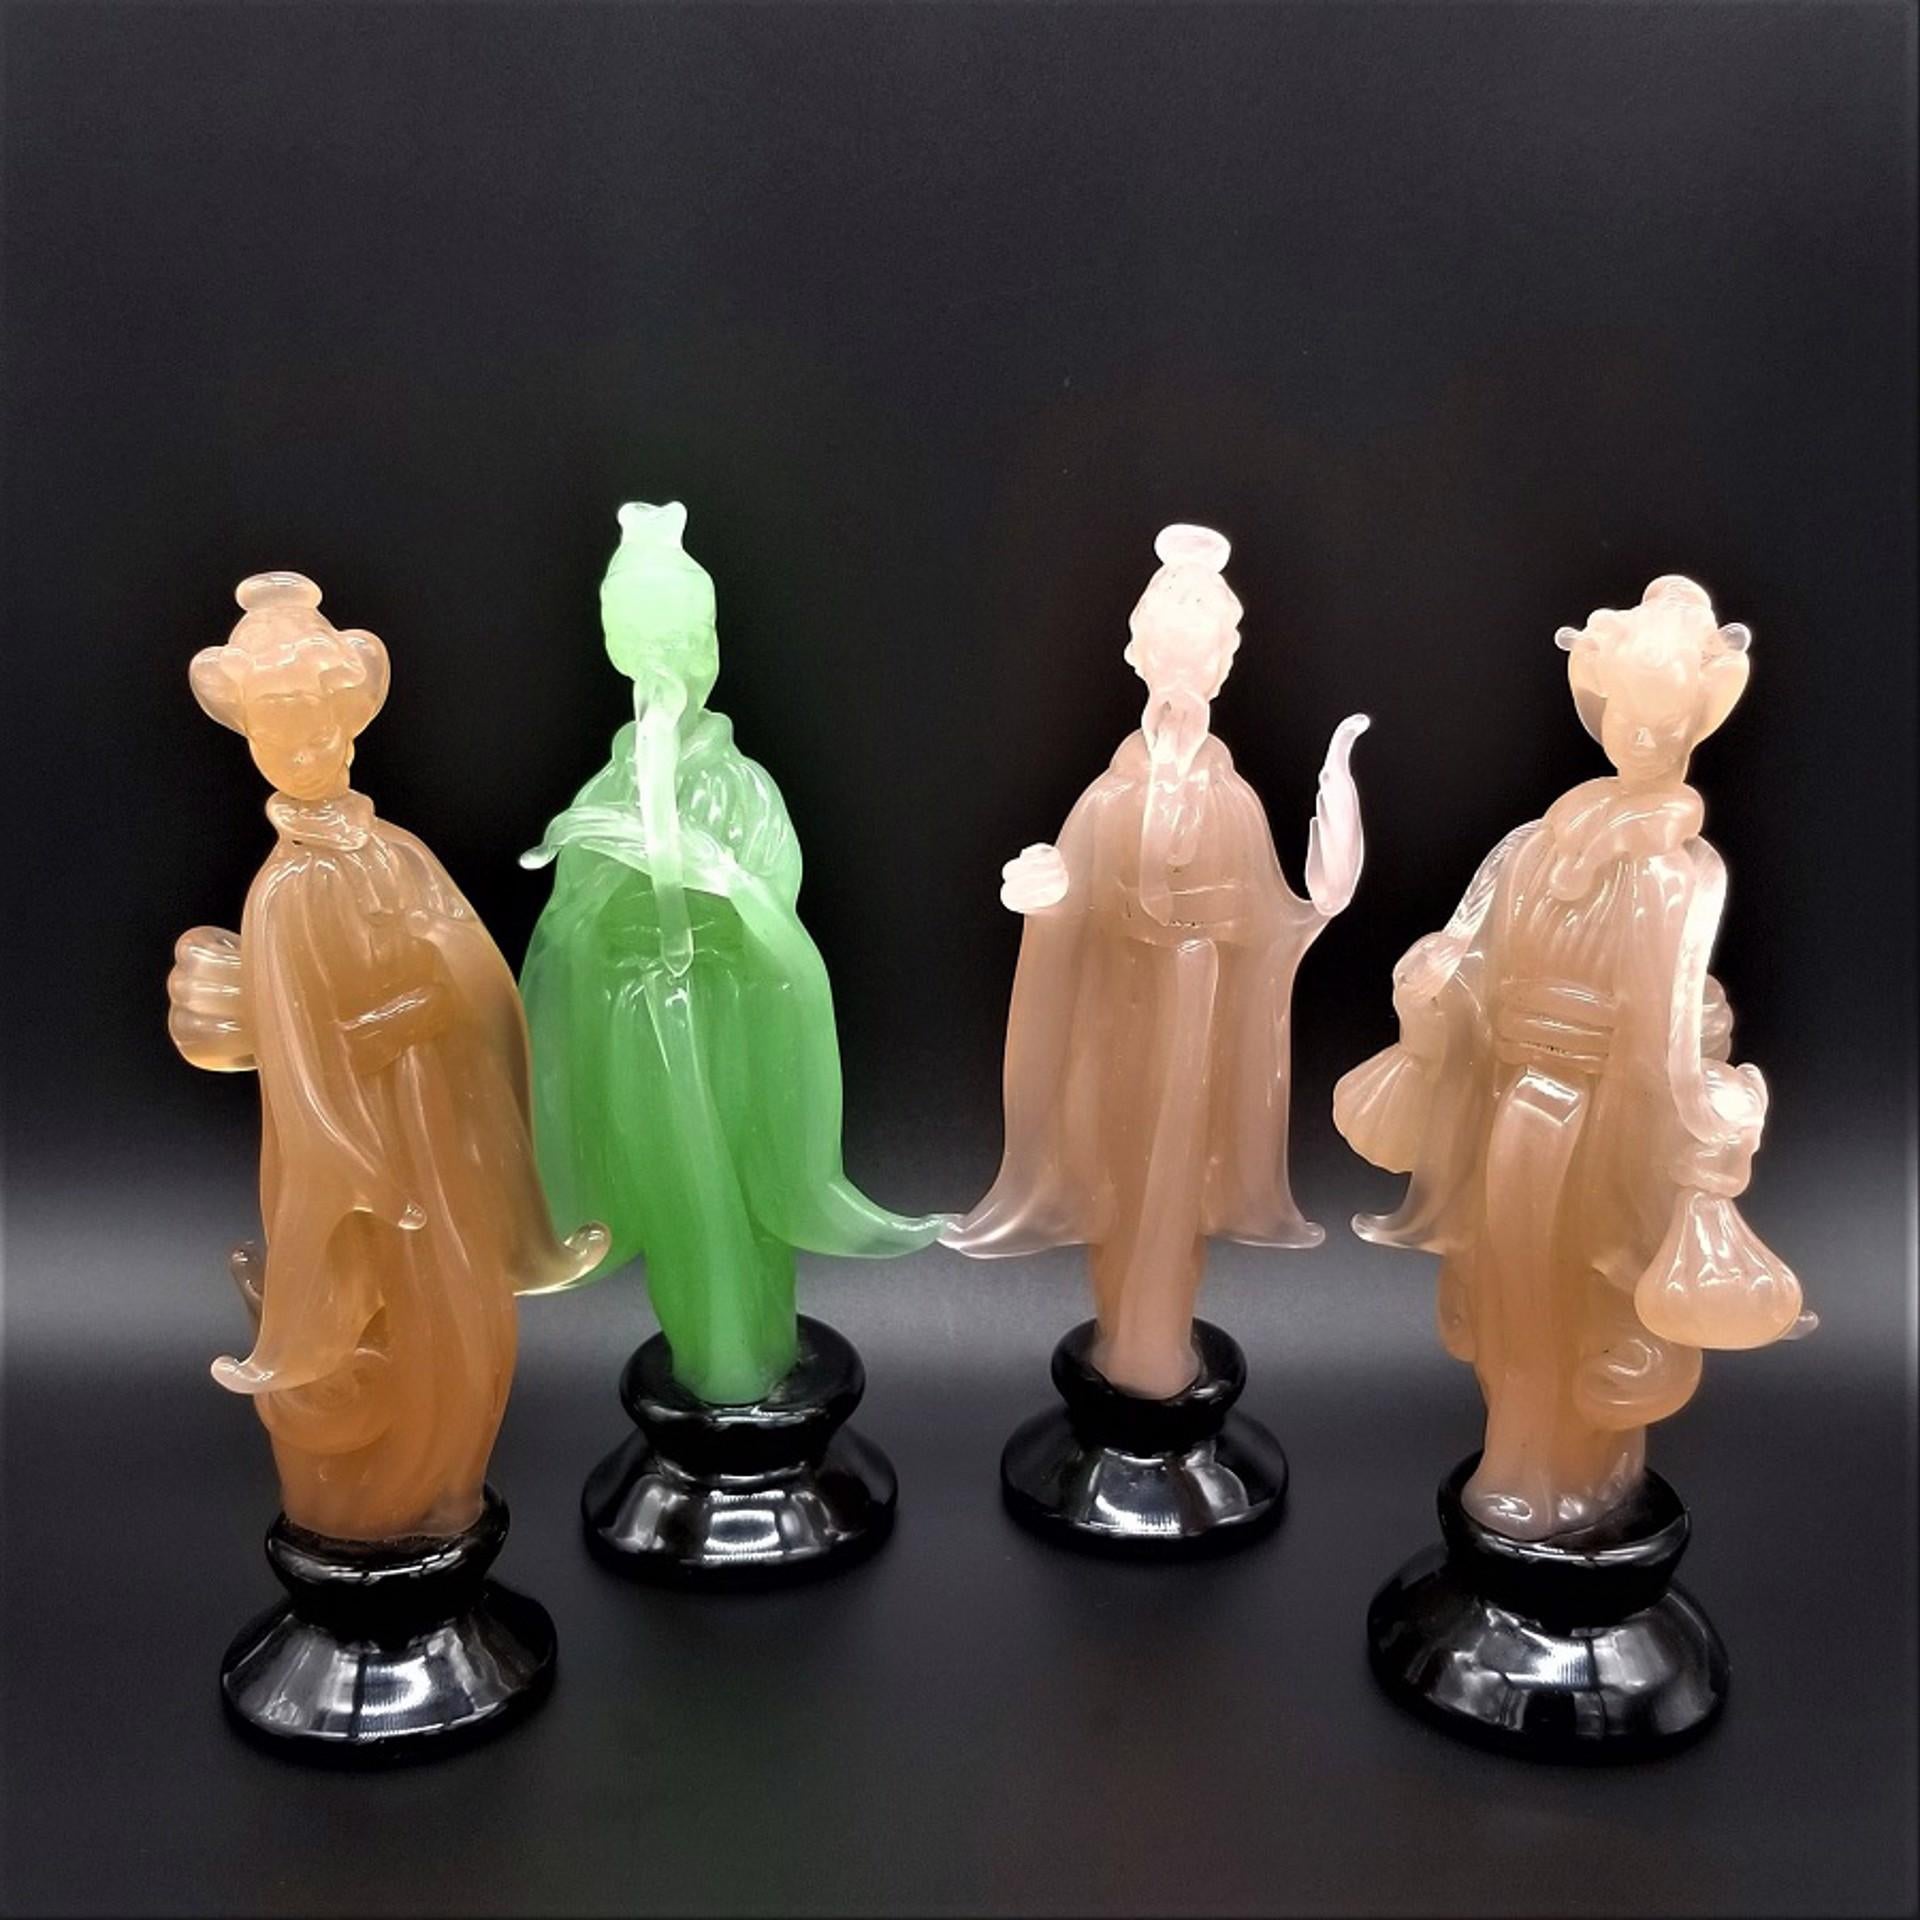 4 Chinese Figures - Sculpture by Ermanno Nason